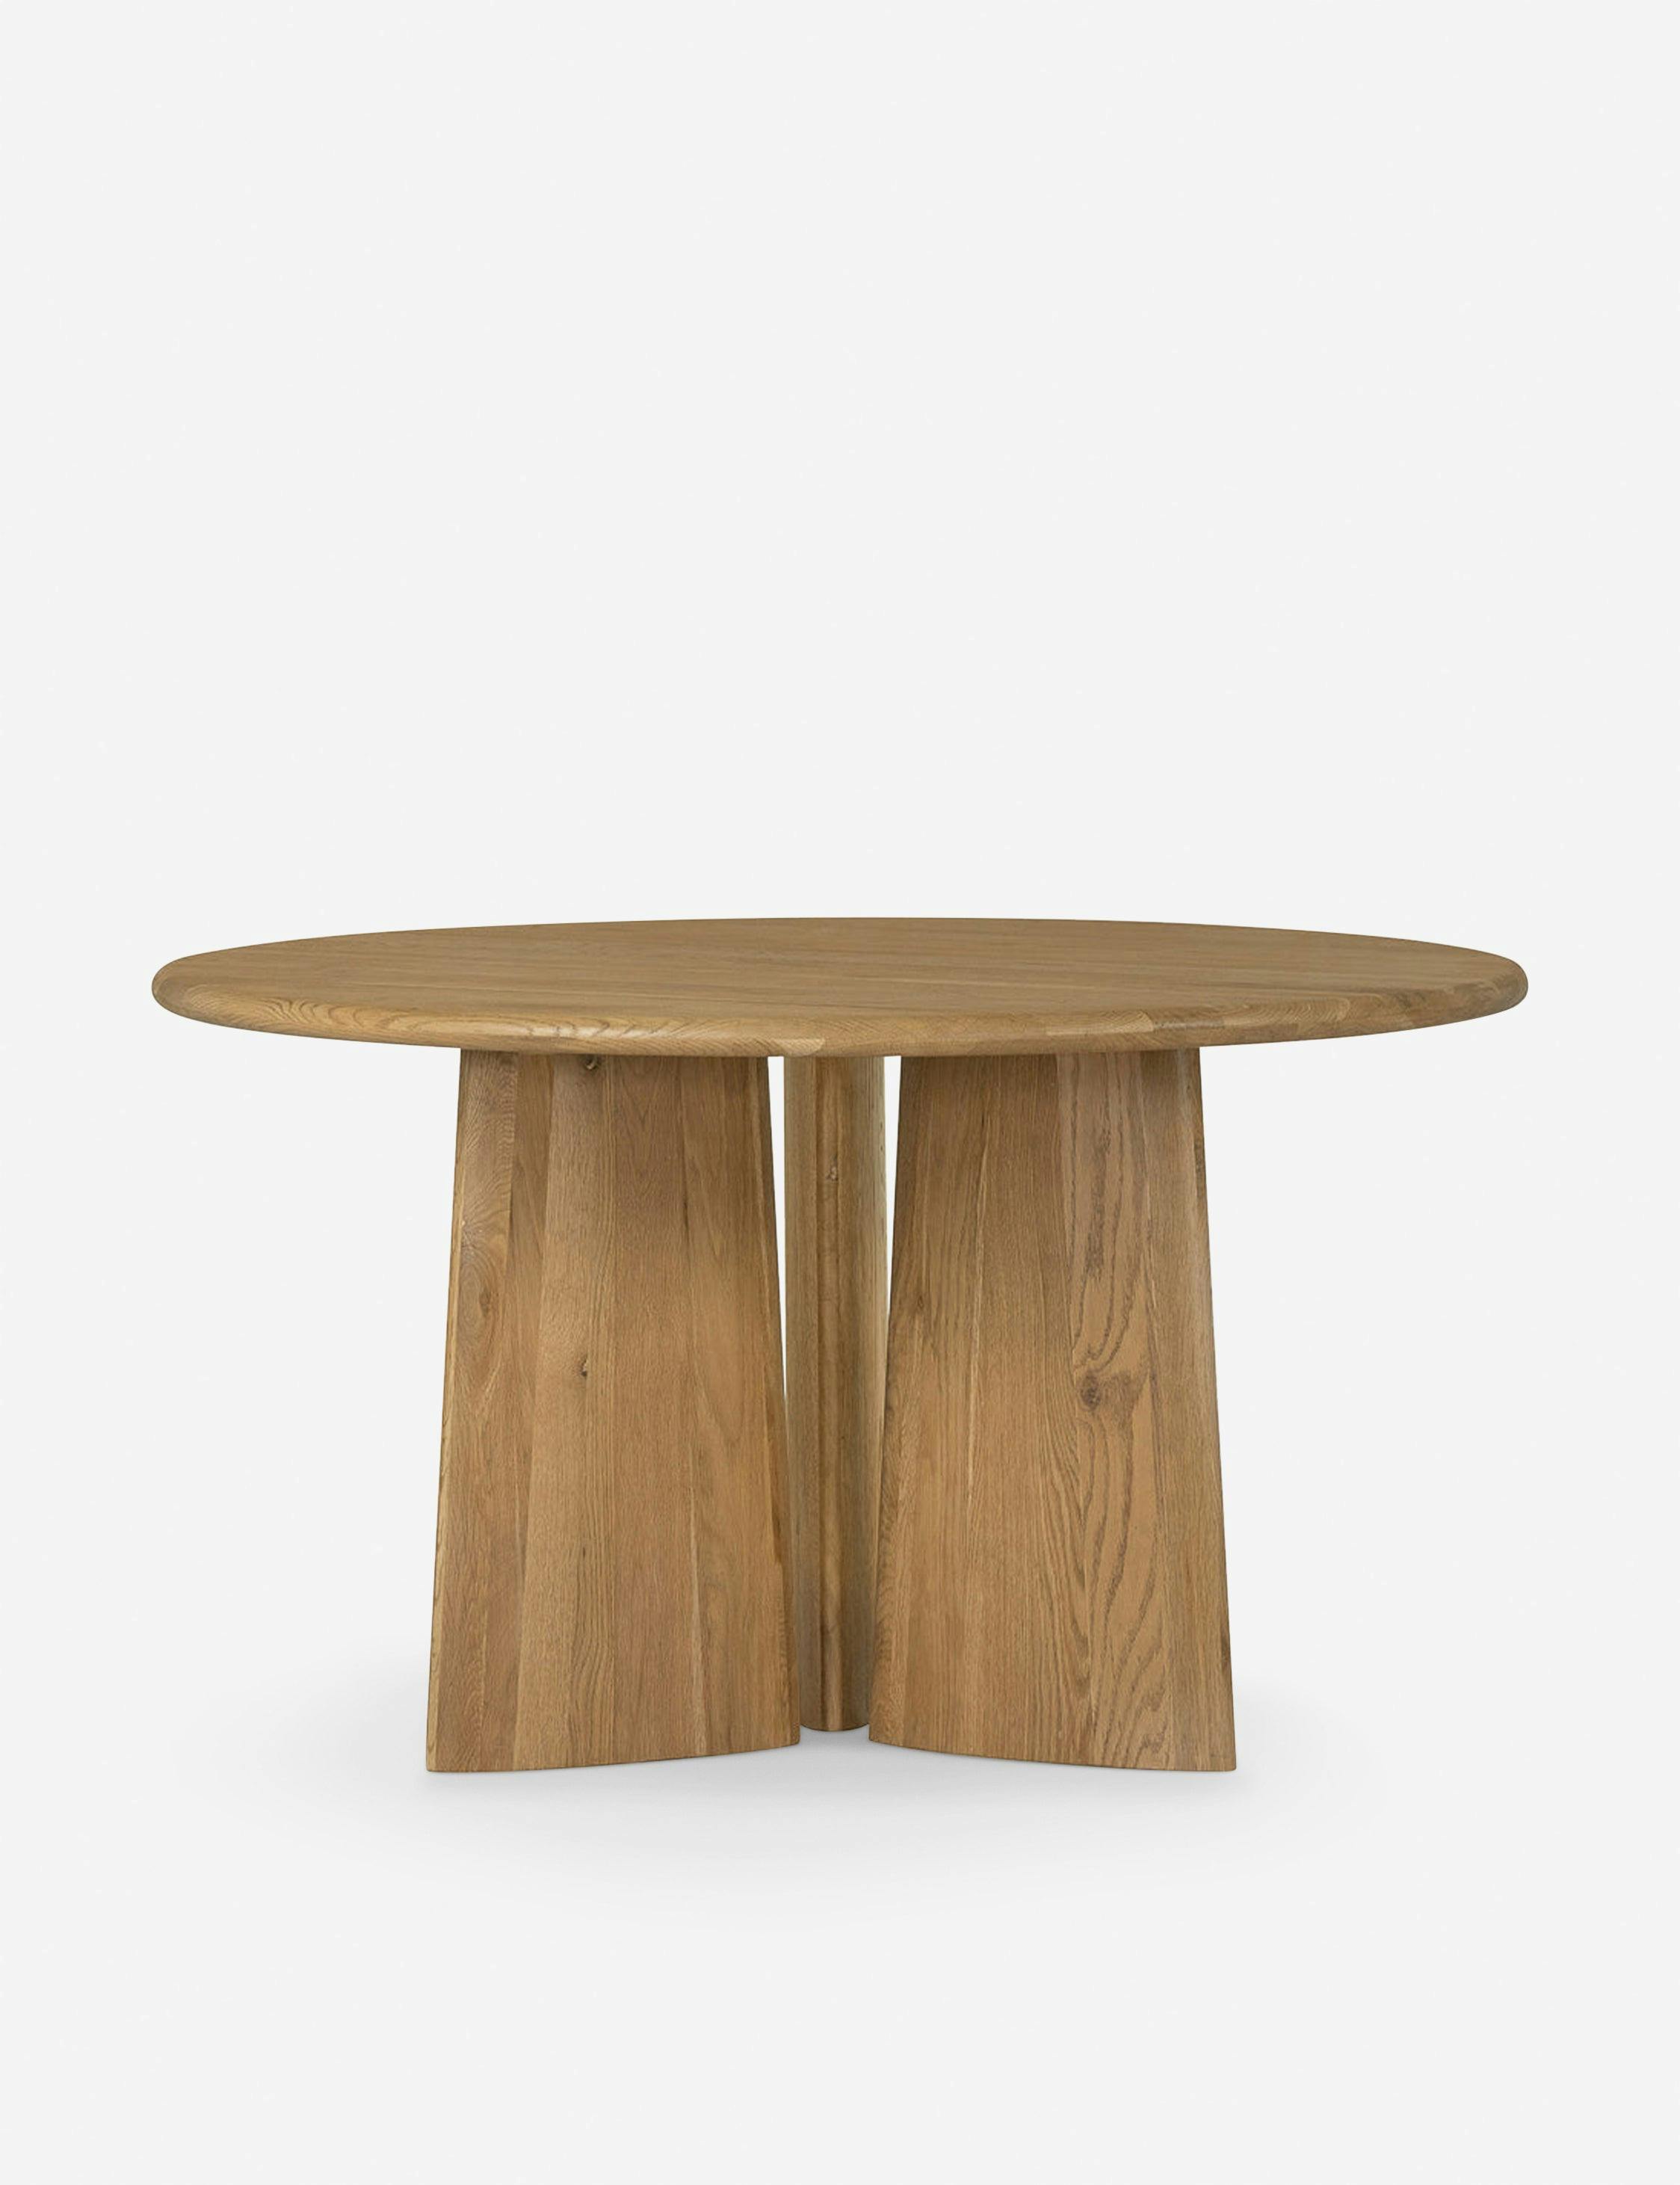 Contemporary Natural Oak Round Dining Table - 52"